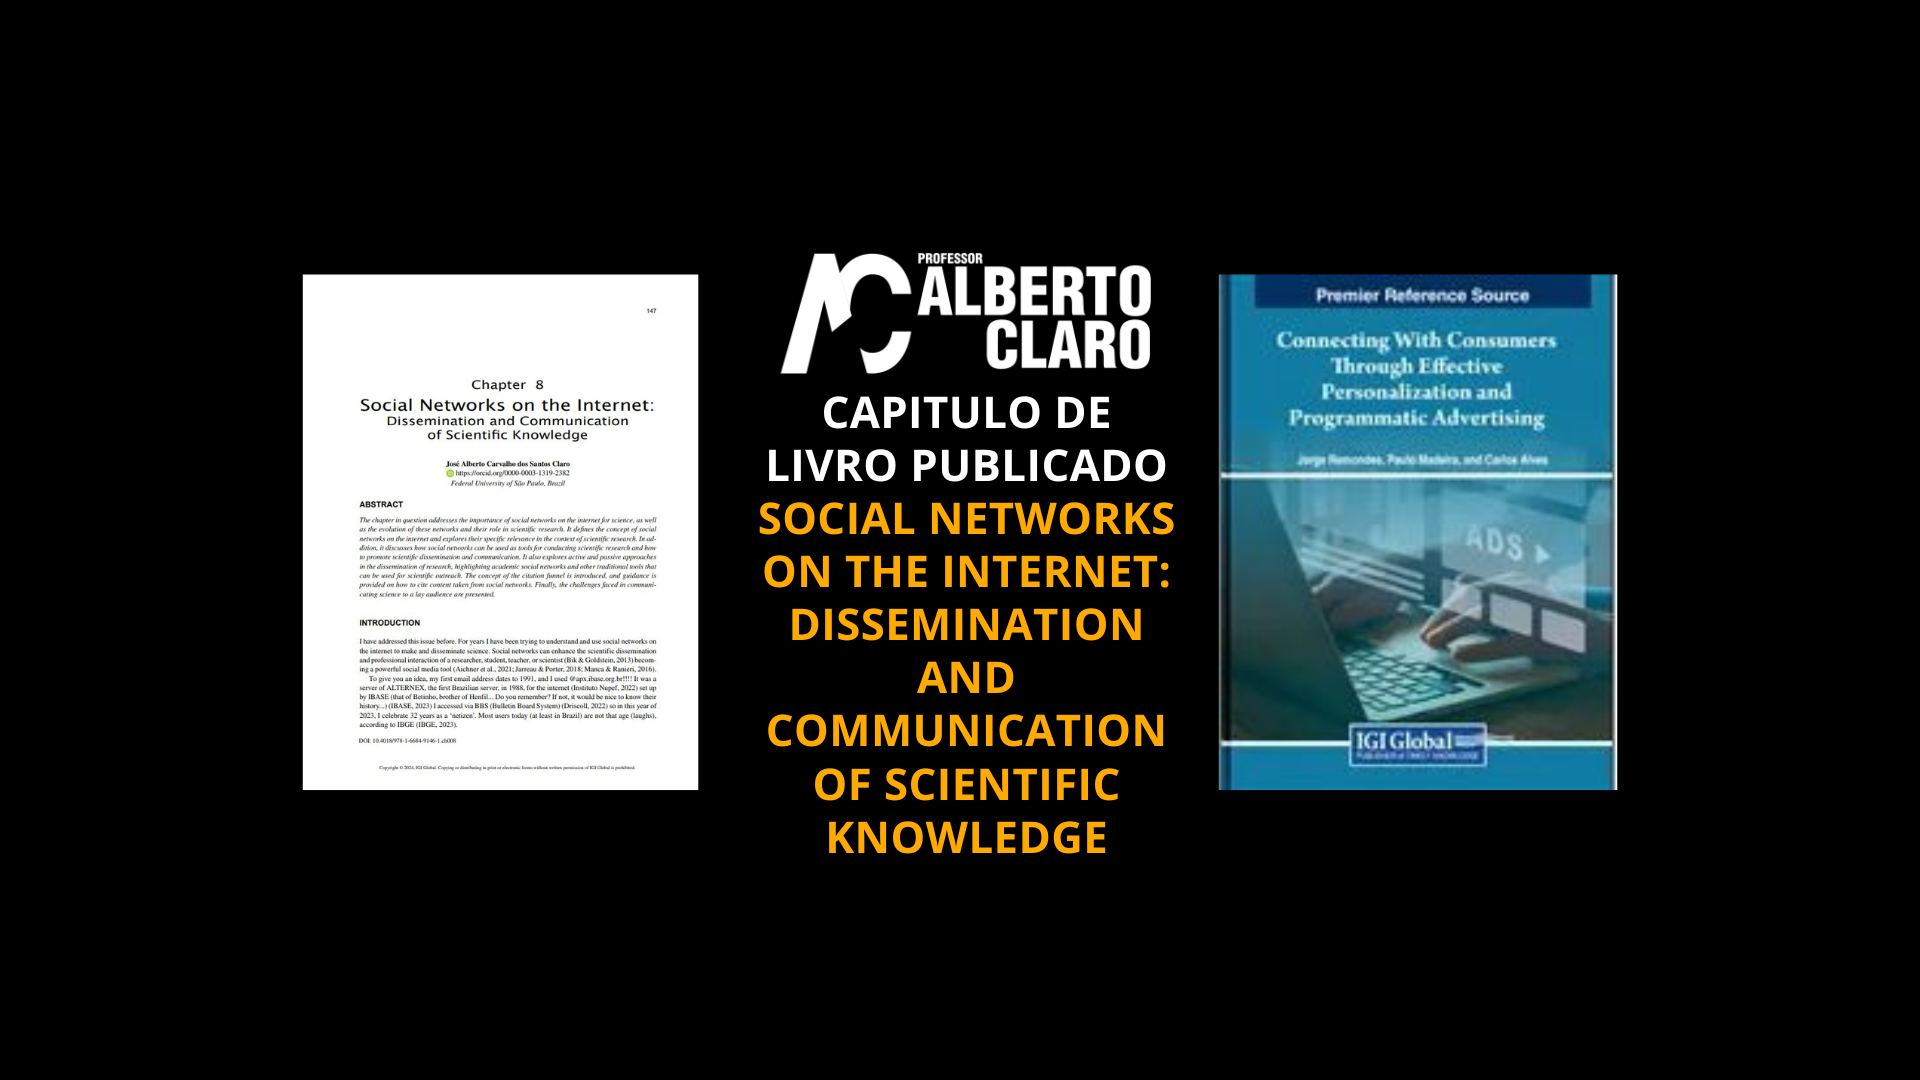 Social Networks on the Internet: Dissemination and Communication of Scientific Knowledge